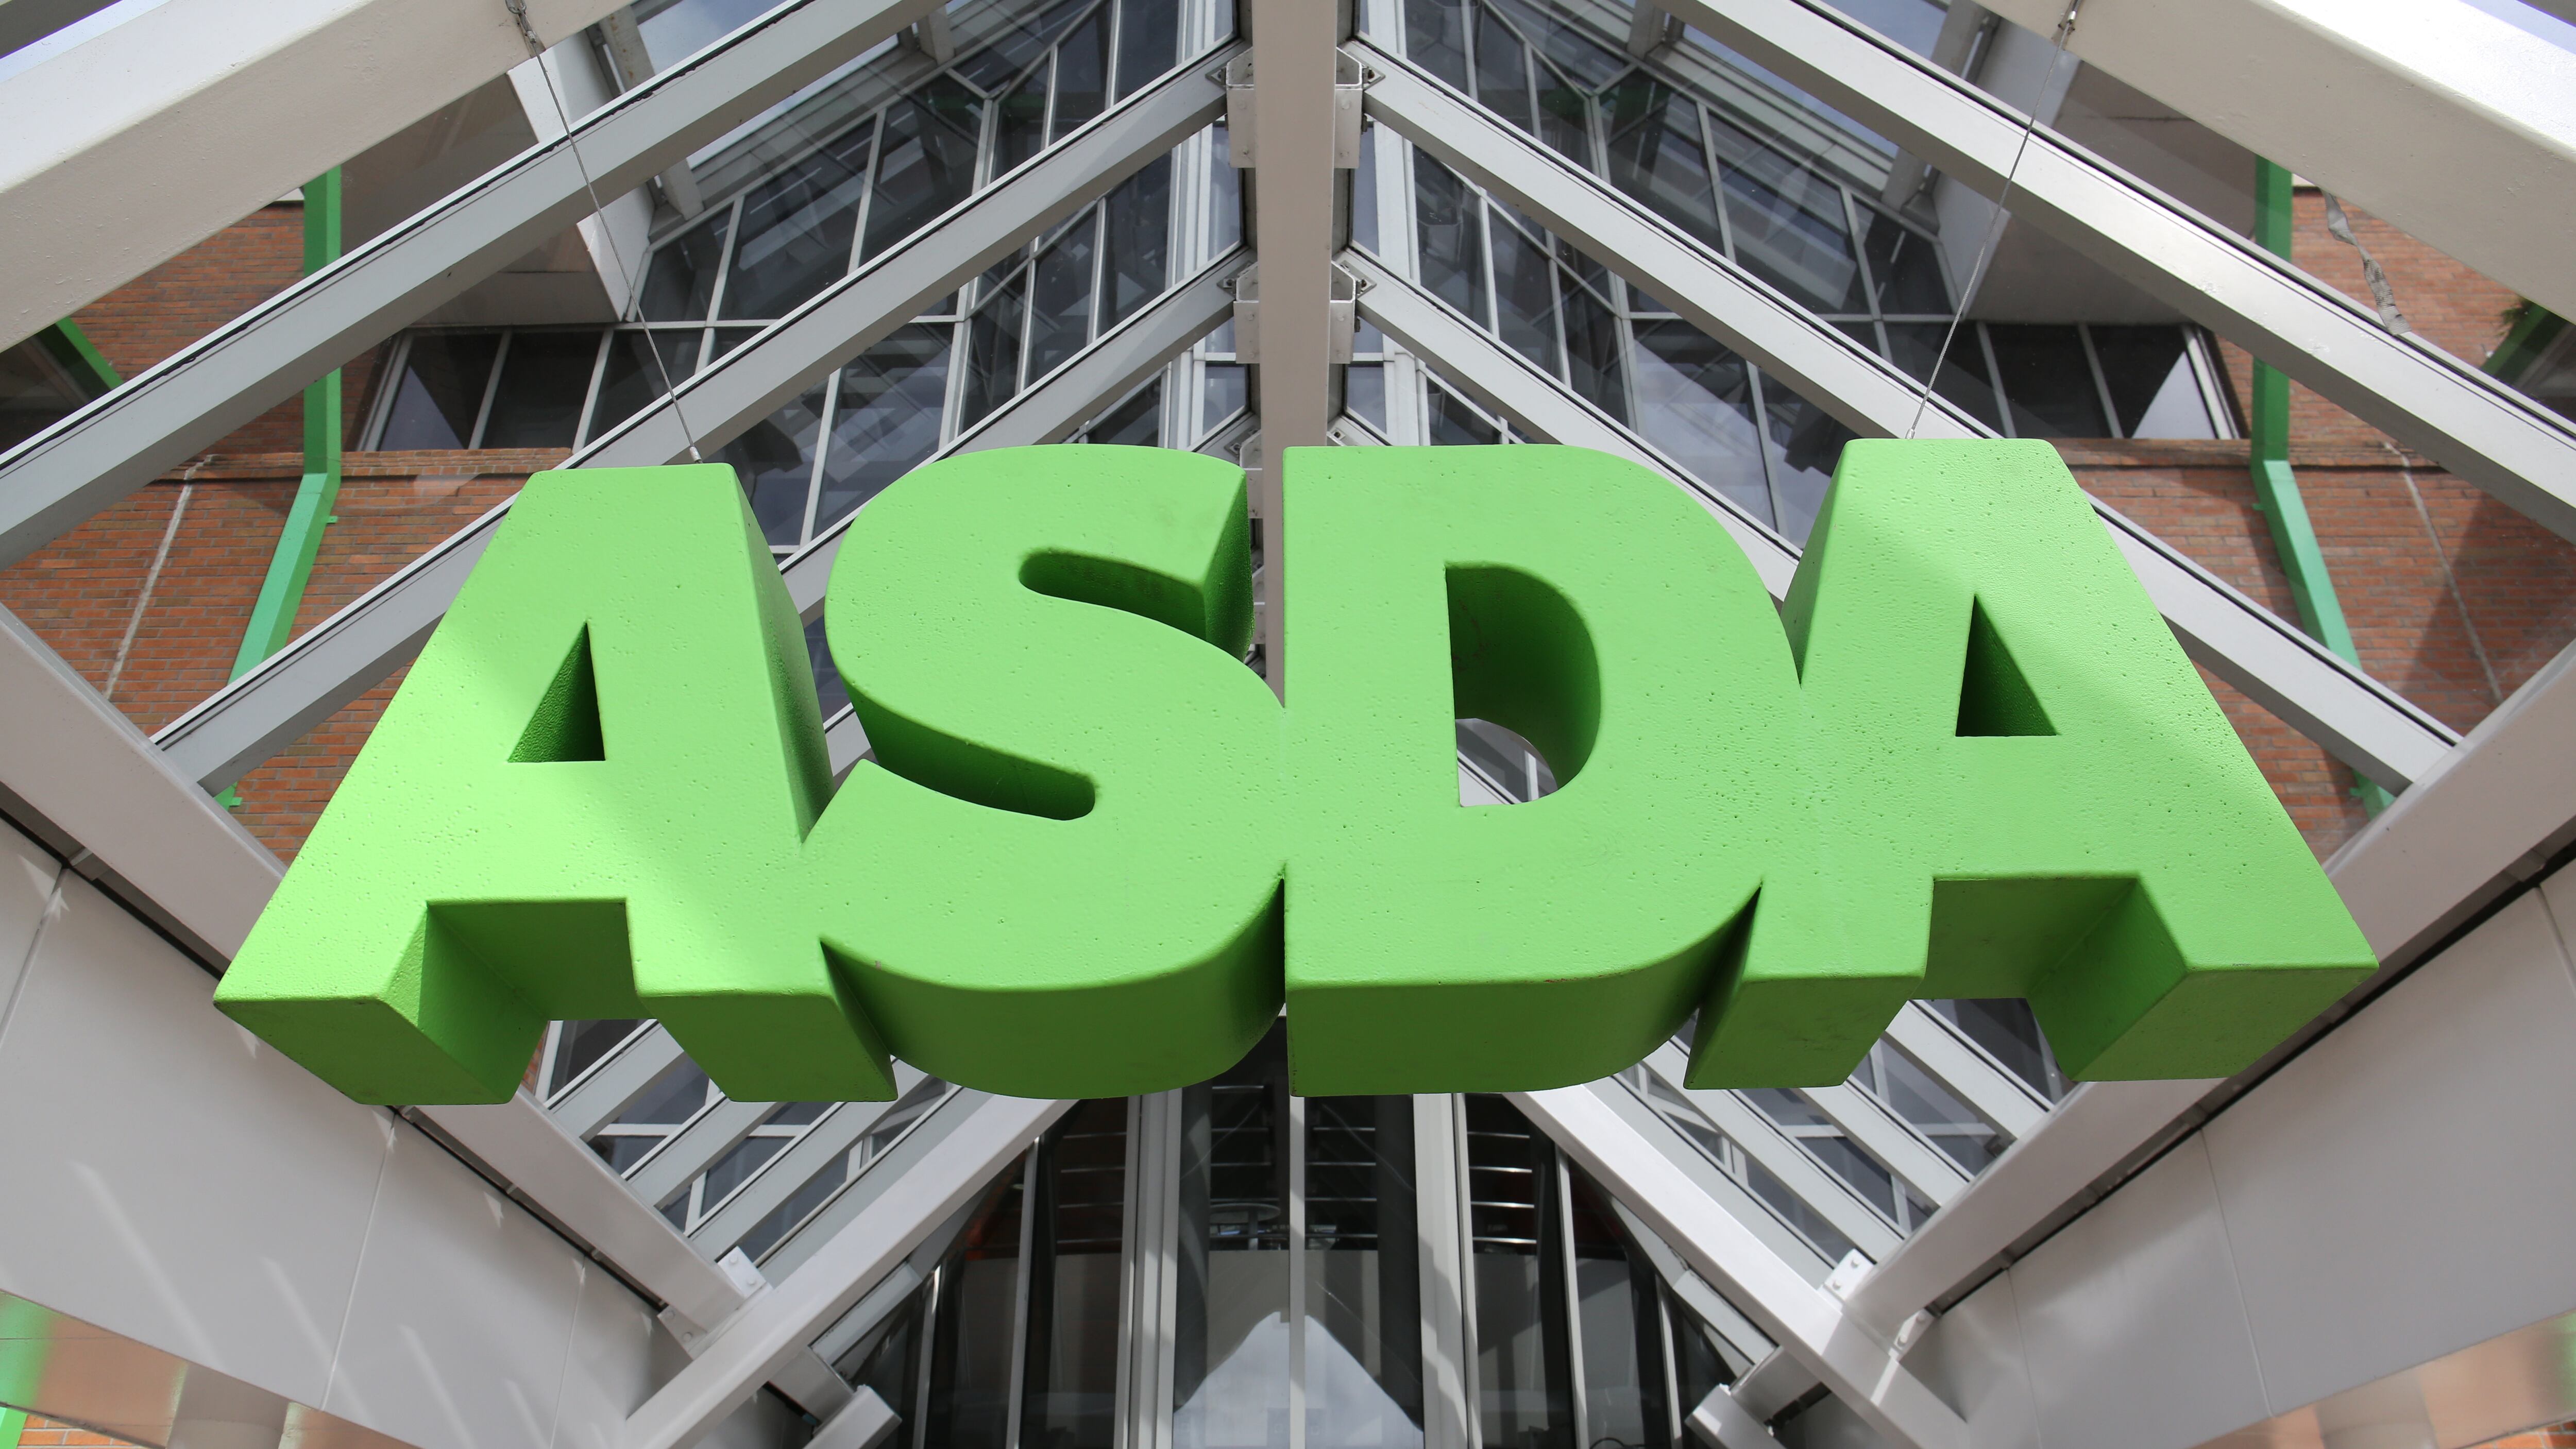 The Issa brother bought Asda in 2021 with TDR Capital’s backing